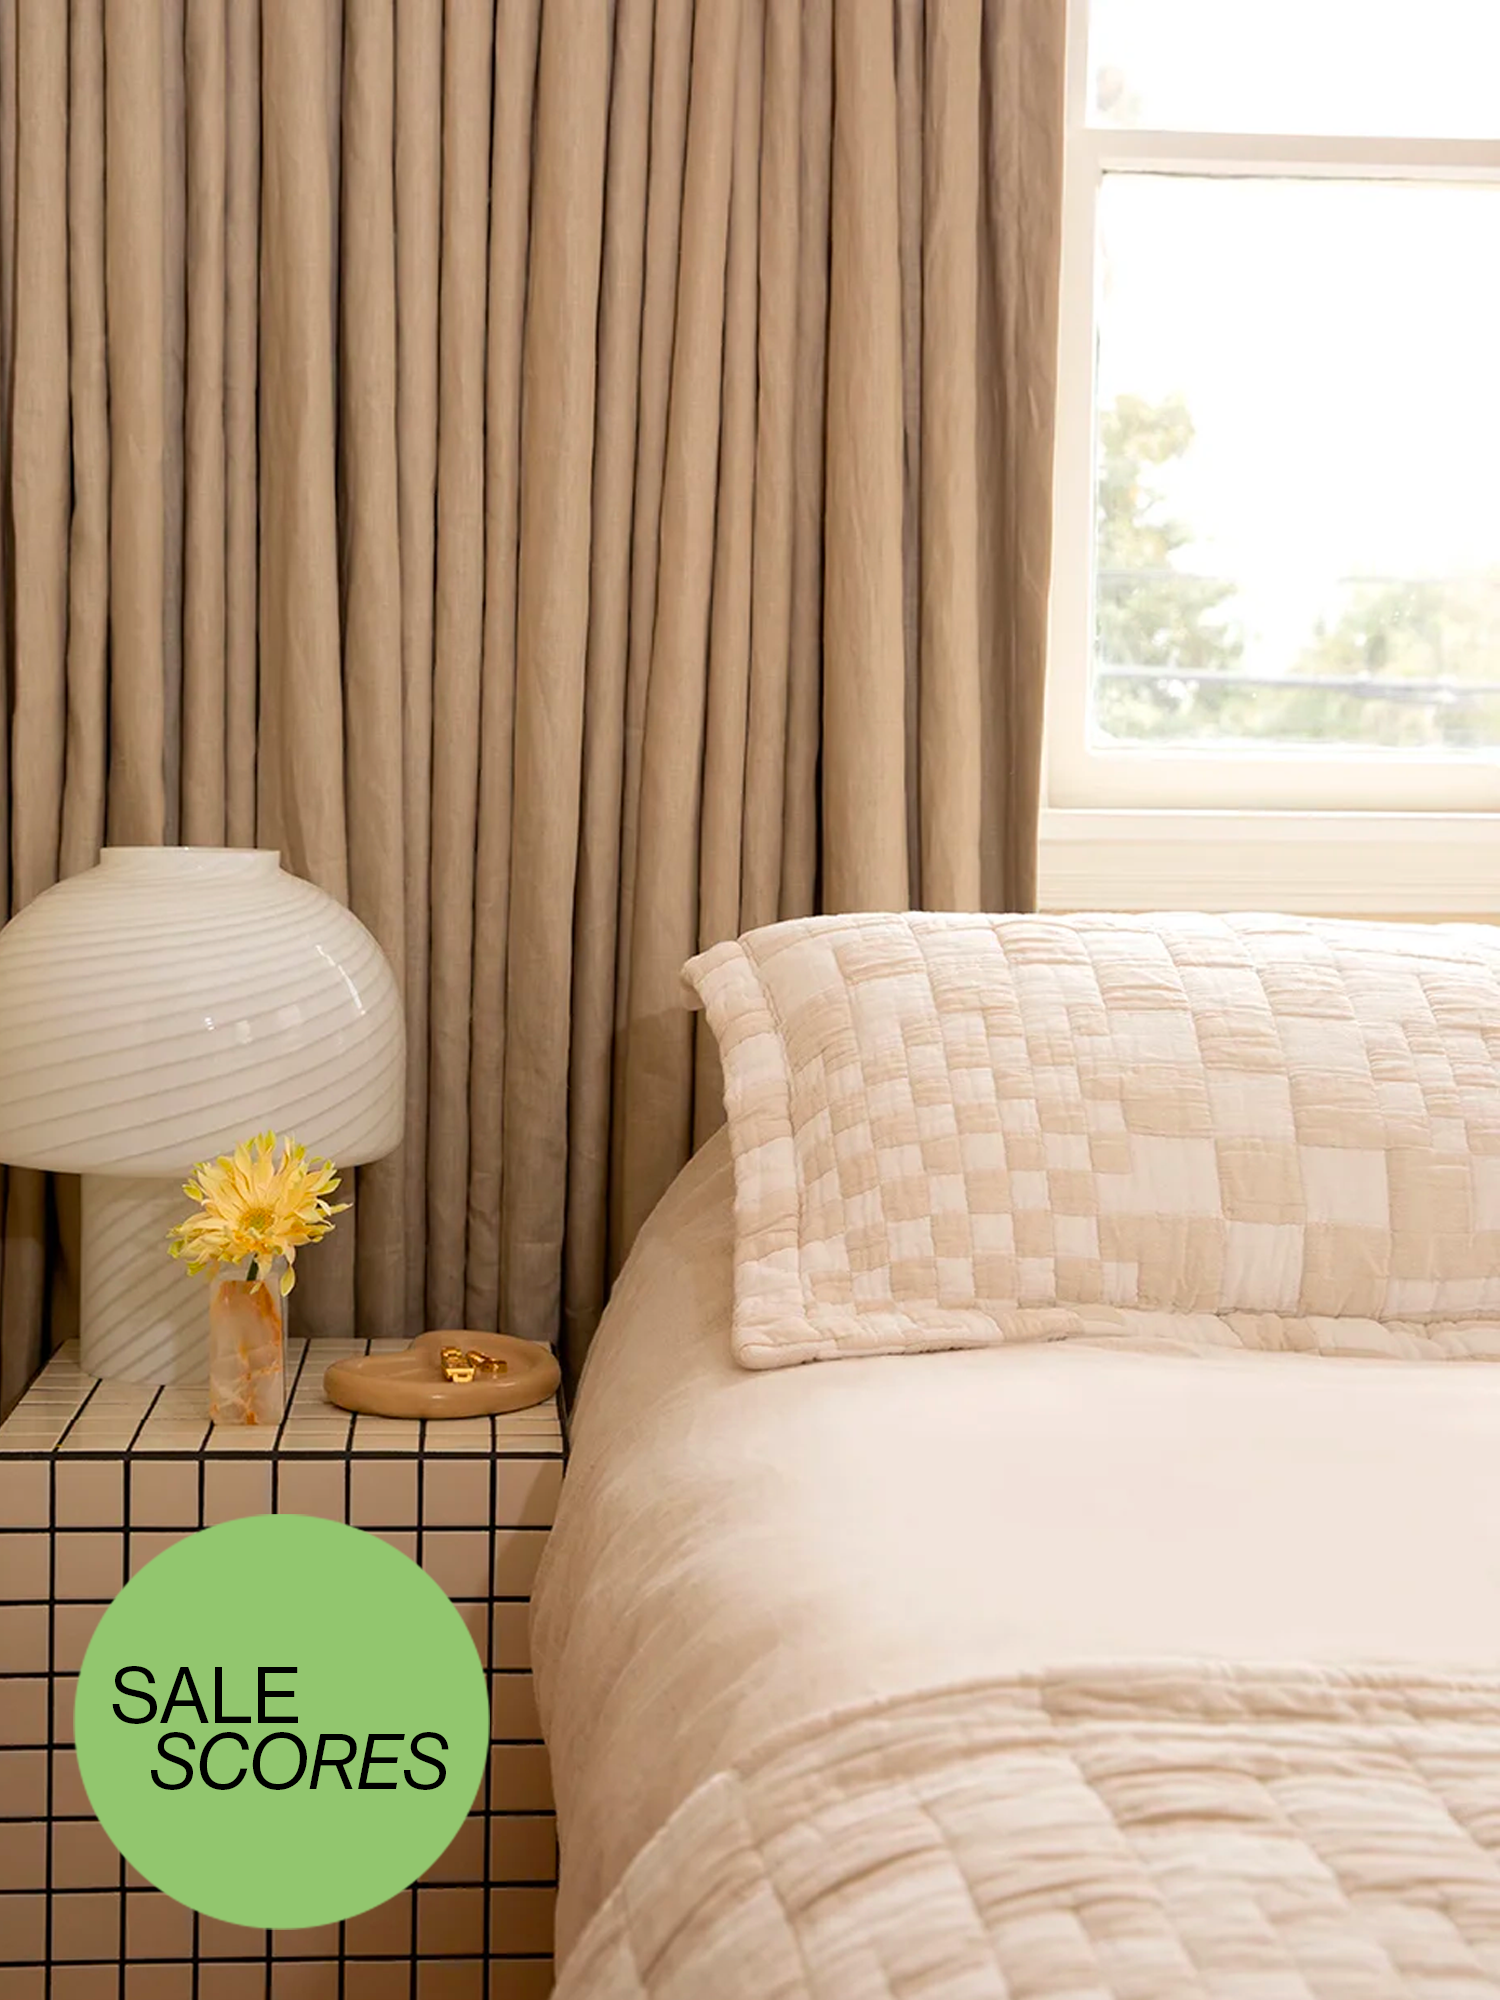 Neutral tone bedroom with checkered bedspread and side table.